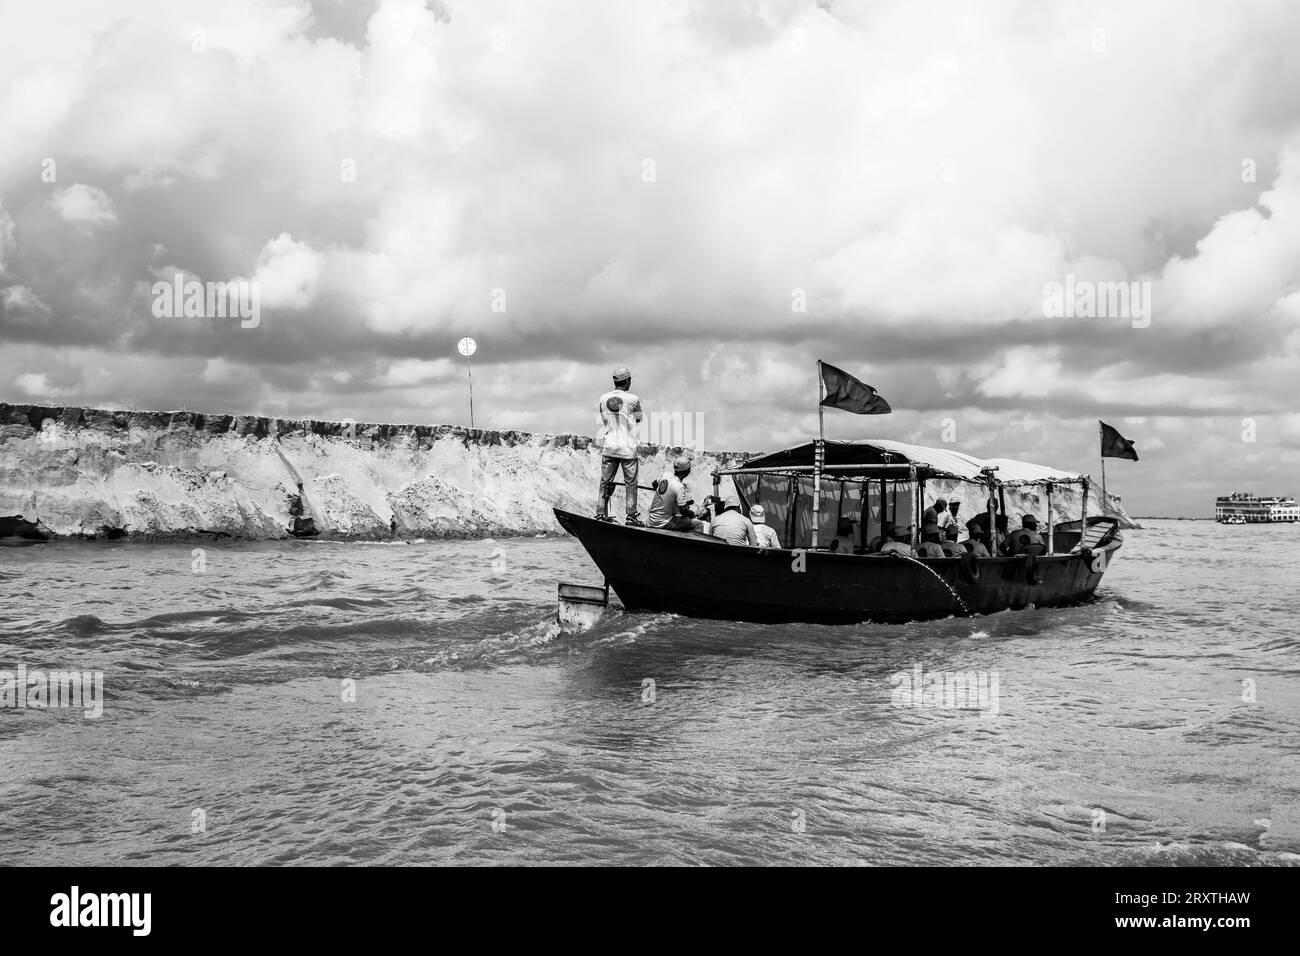 Padma riverbank erosion photography This image was captured on July 25, 2022, from Padma River, Bnagladesh Stock Photo